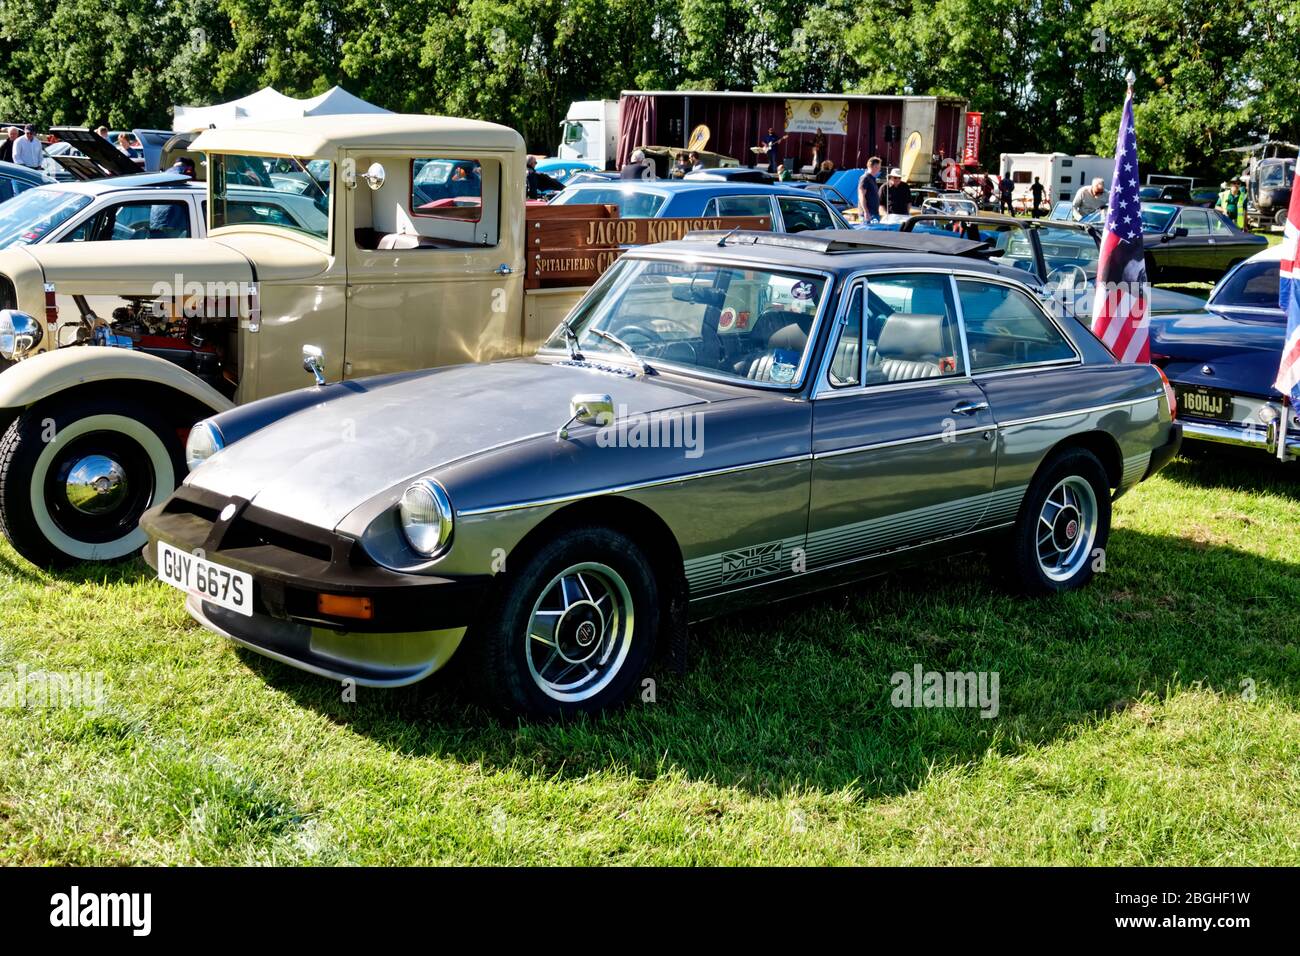 Westbury, Wiltshire / UK - September 1 2019: A 1978 MGB GT V8 (GUY 557S) 2-door coupe sports car, at the White Horse Classic & Vintage Vehicle Show Stock Photo